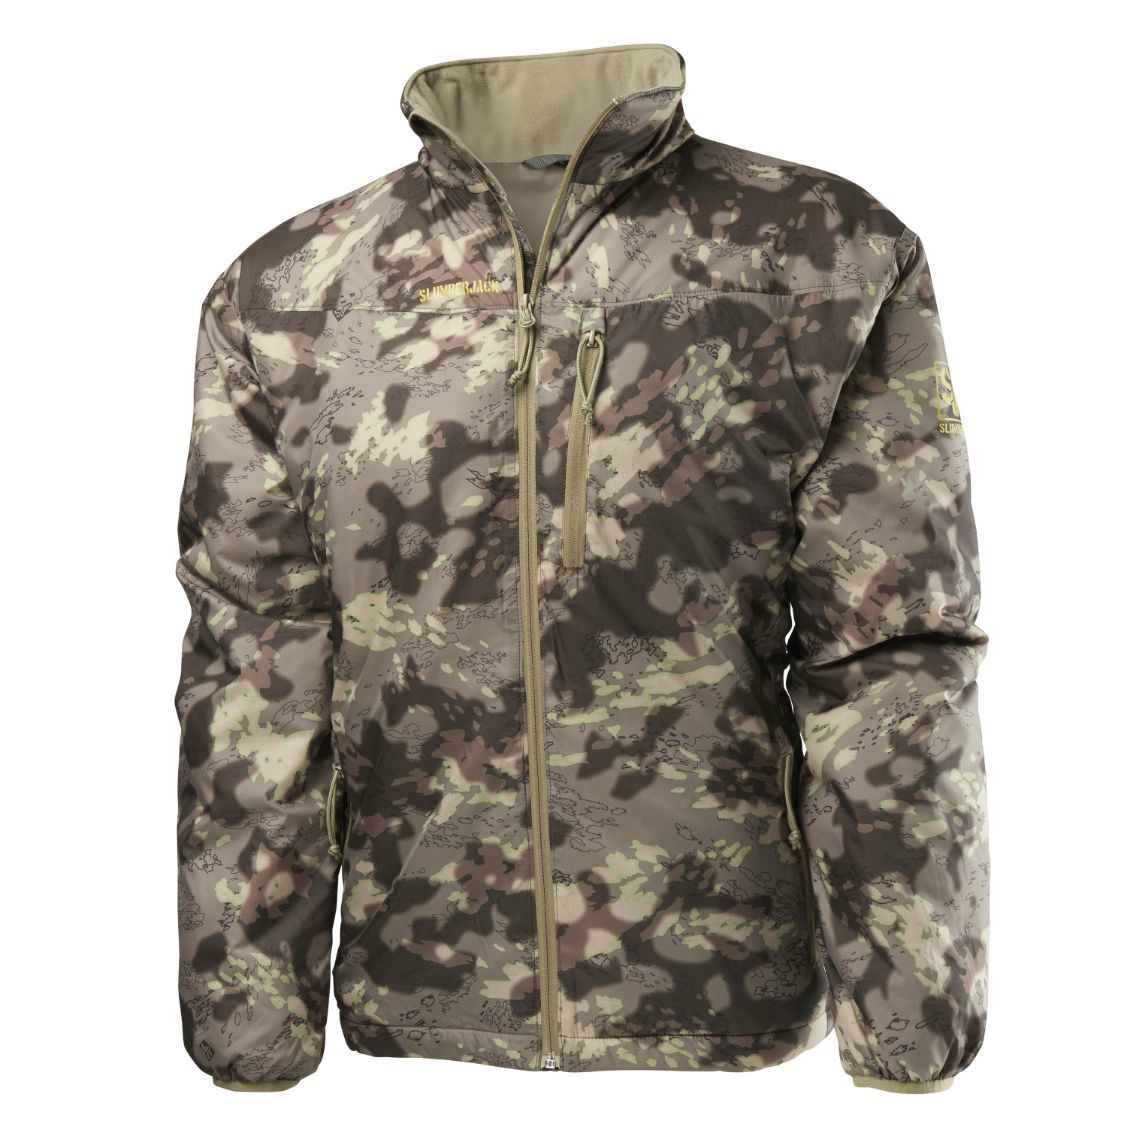 Must-Stock Cold-Weather Gear | Hunting Retailer